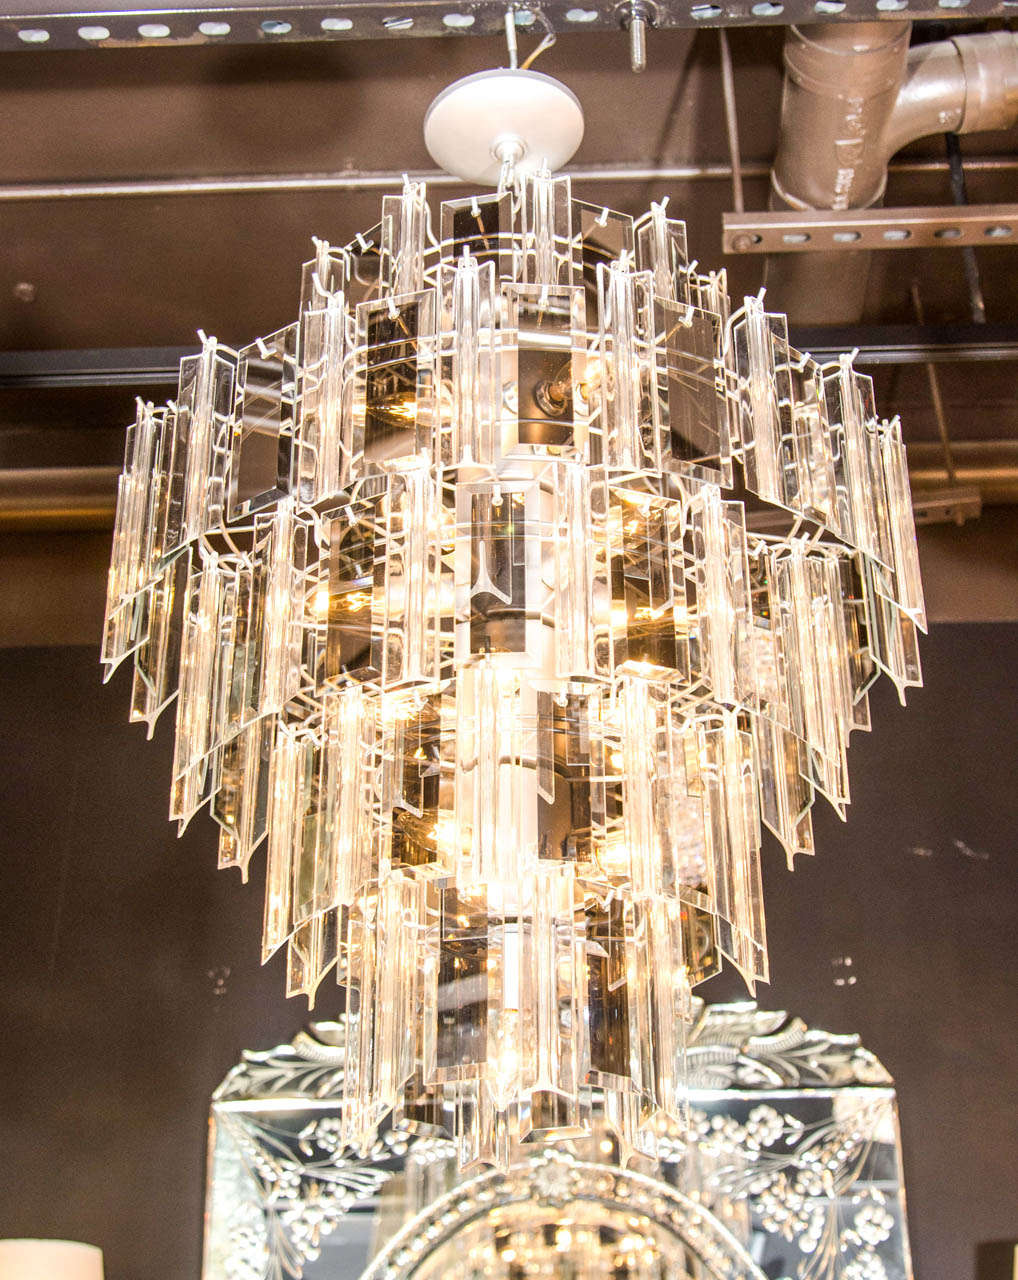 Modernist five tier chandelier with alternating glass panel prisms and lucite prisms. The glass prisms are rectangular in shape with hand beveled borders and have stunning smoked mirrored centers. The lucite prisms are fluted and three sided and